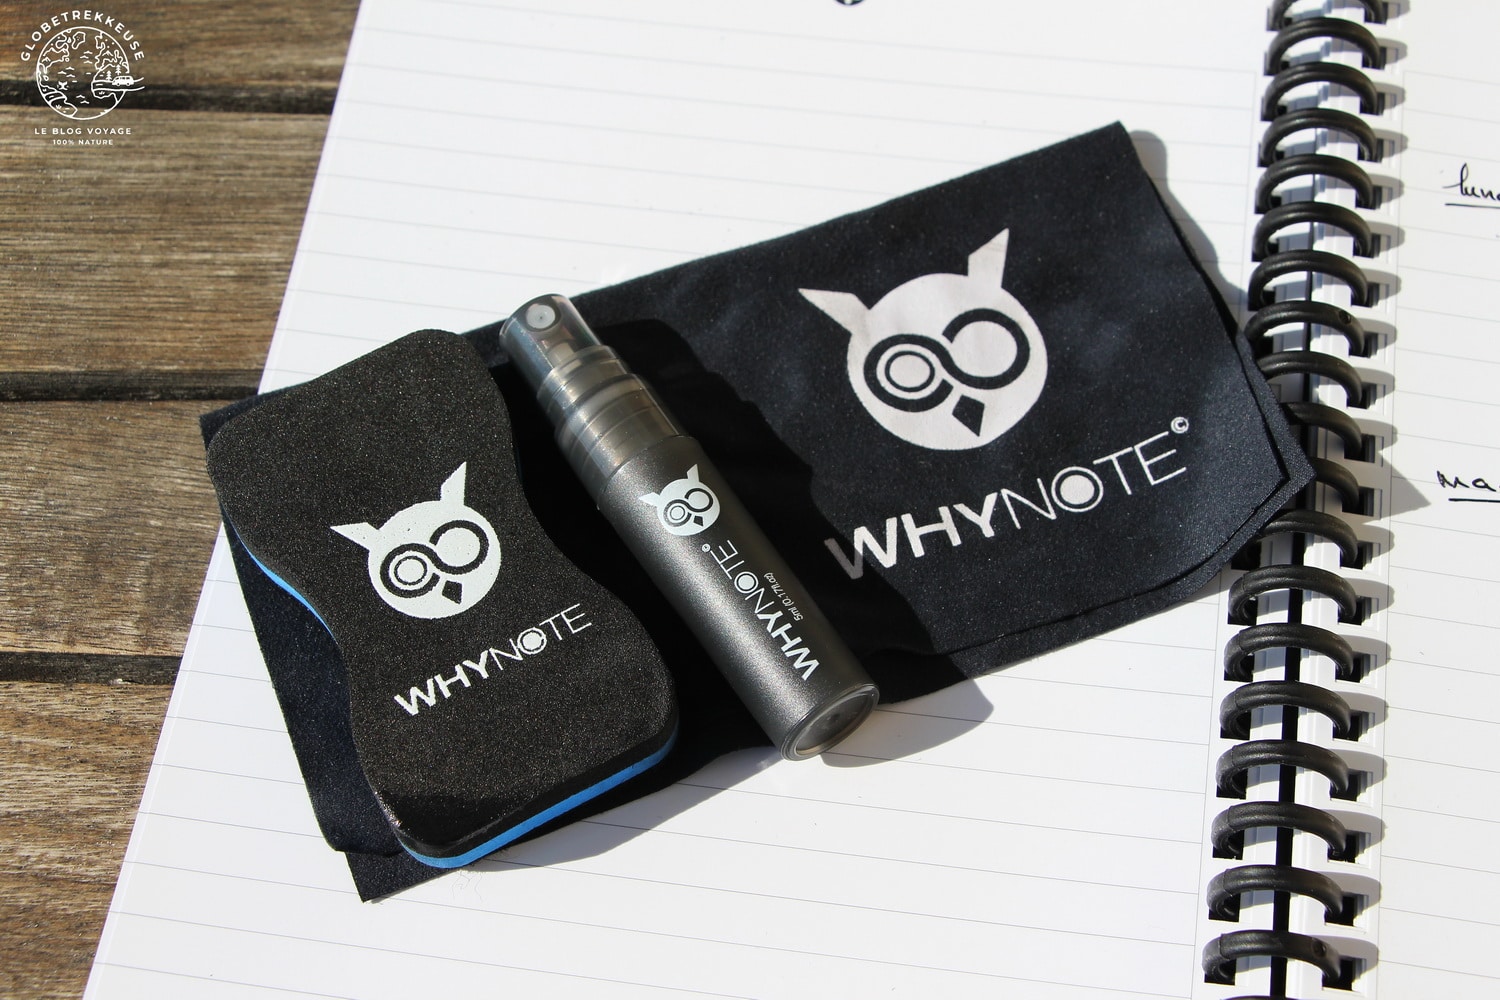 carnet notes whynote kit nettoyage